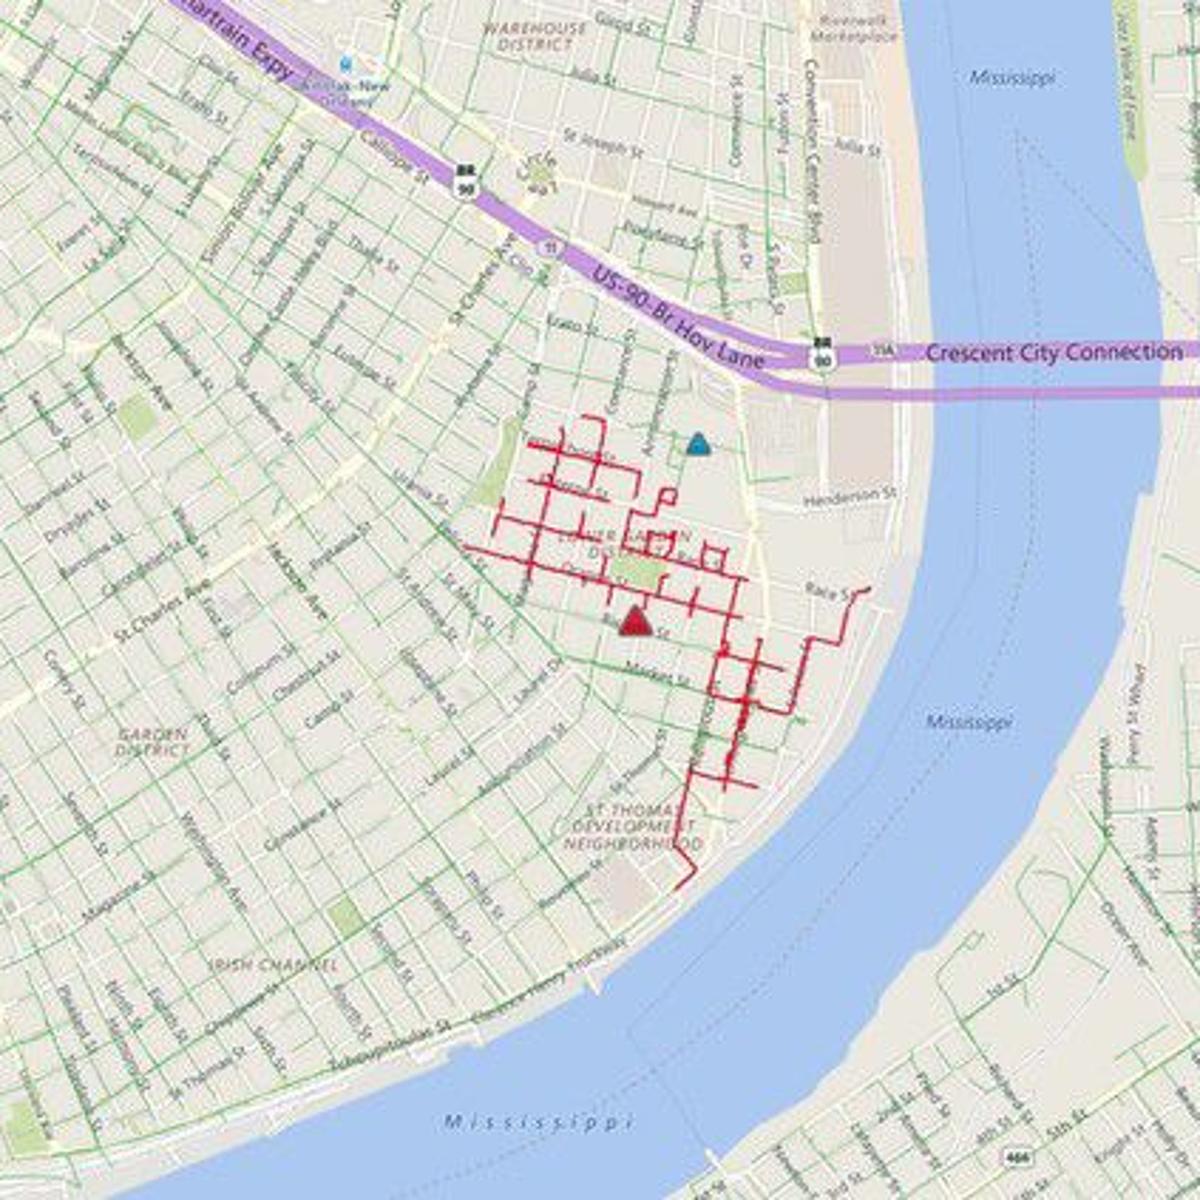 1 200 Without Power In Lower Garden District As Heavy Rain Moves